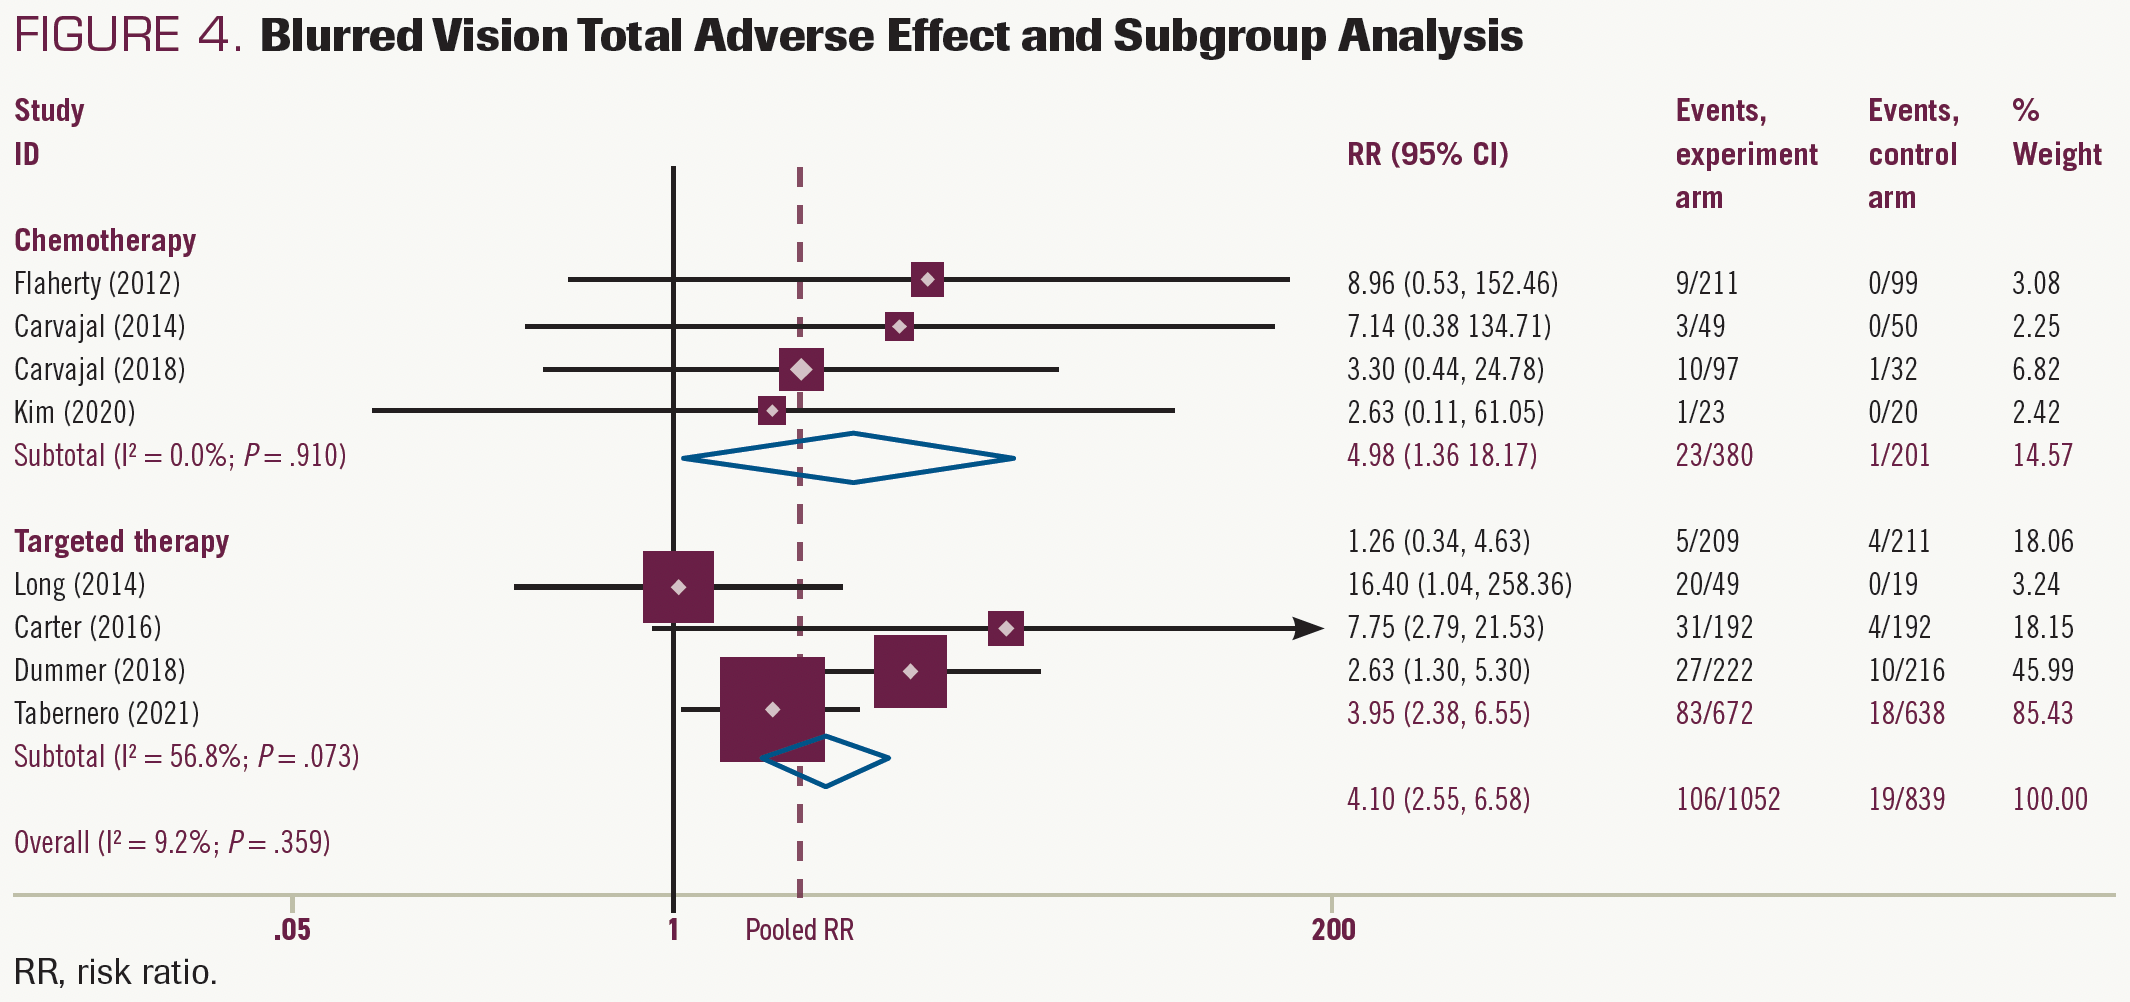 FIGURE 4. Blurred Vision Total Adverse Effect and Subgroup Analysis